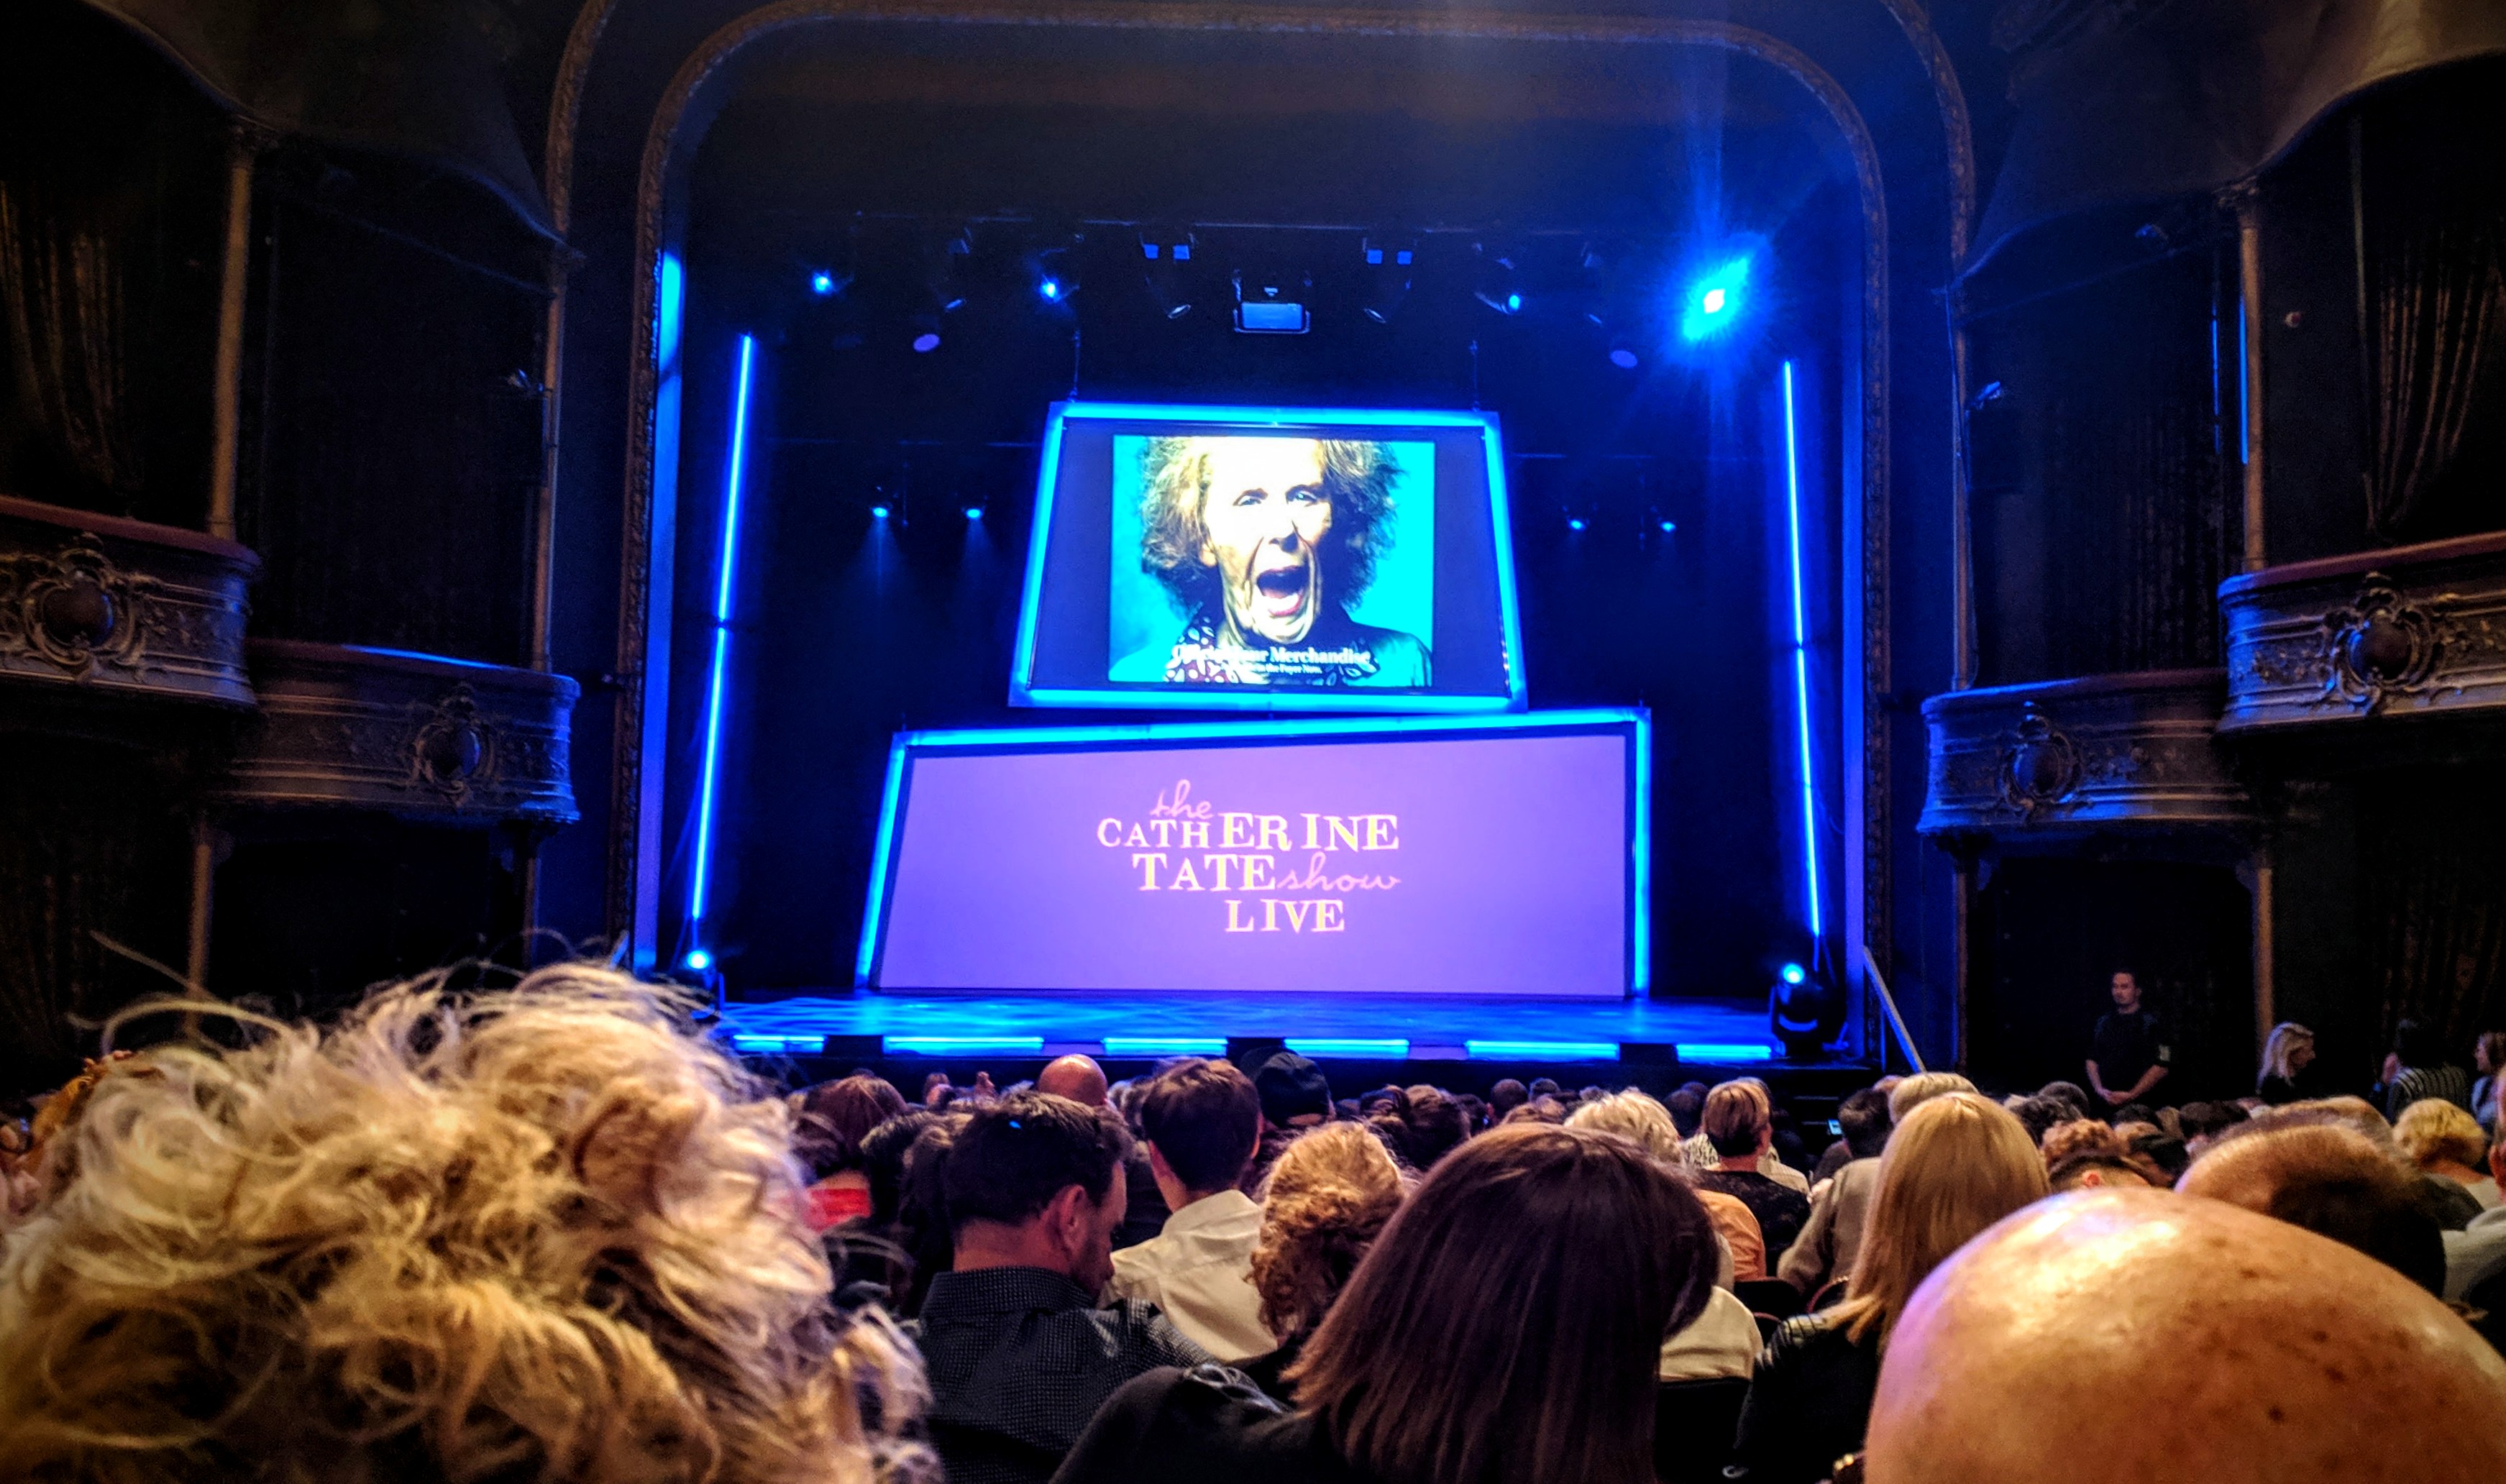 Waiting for Catherine Tate at The Opera House, Wellington